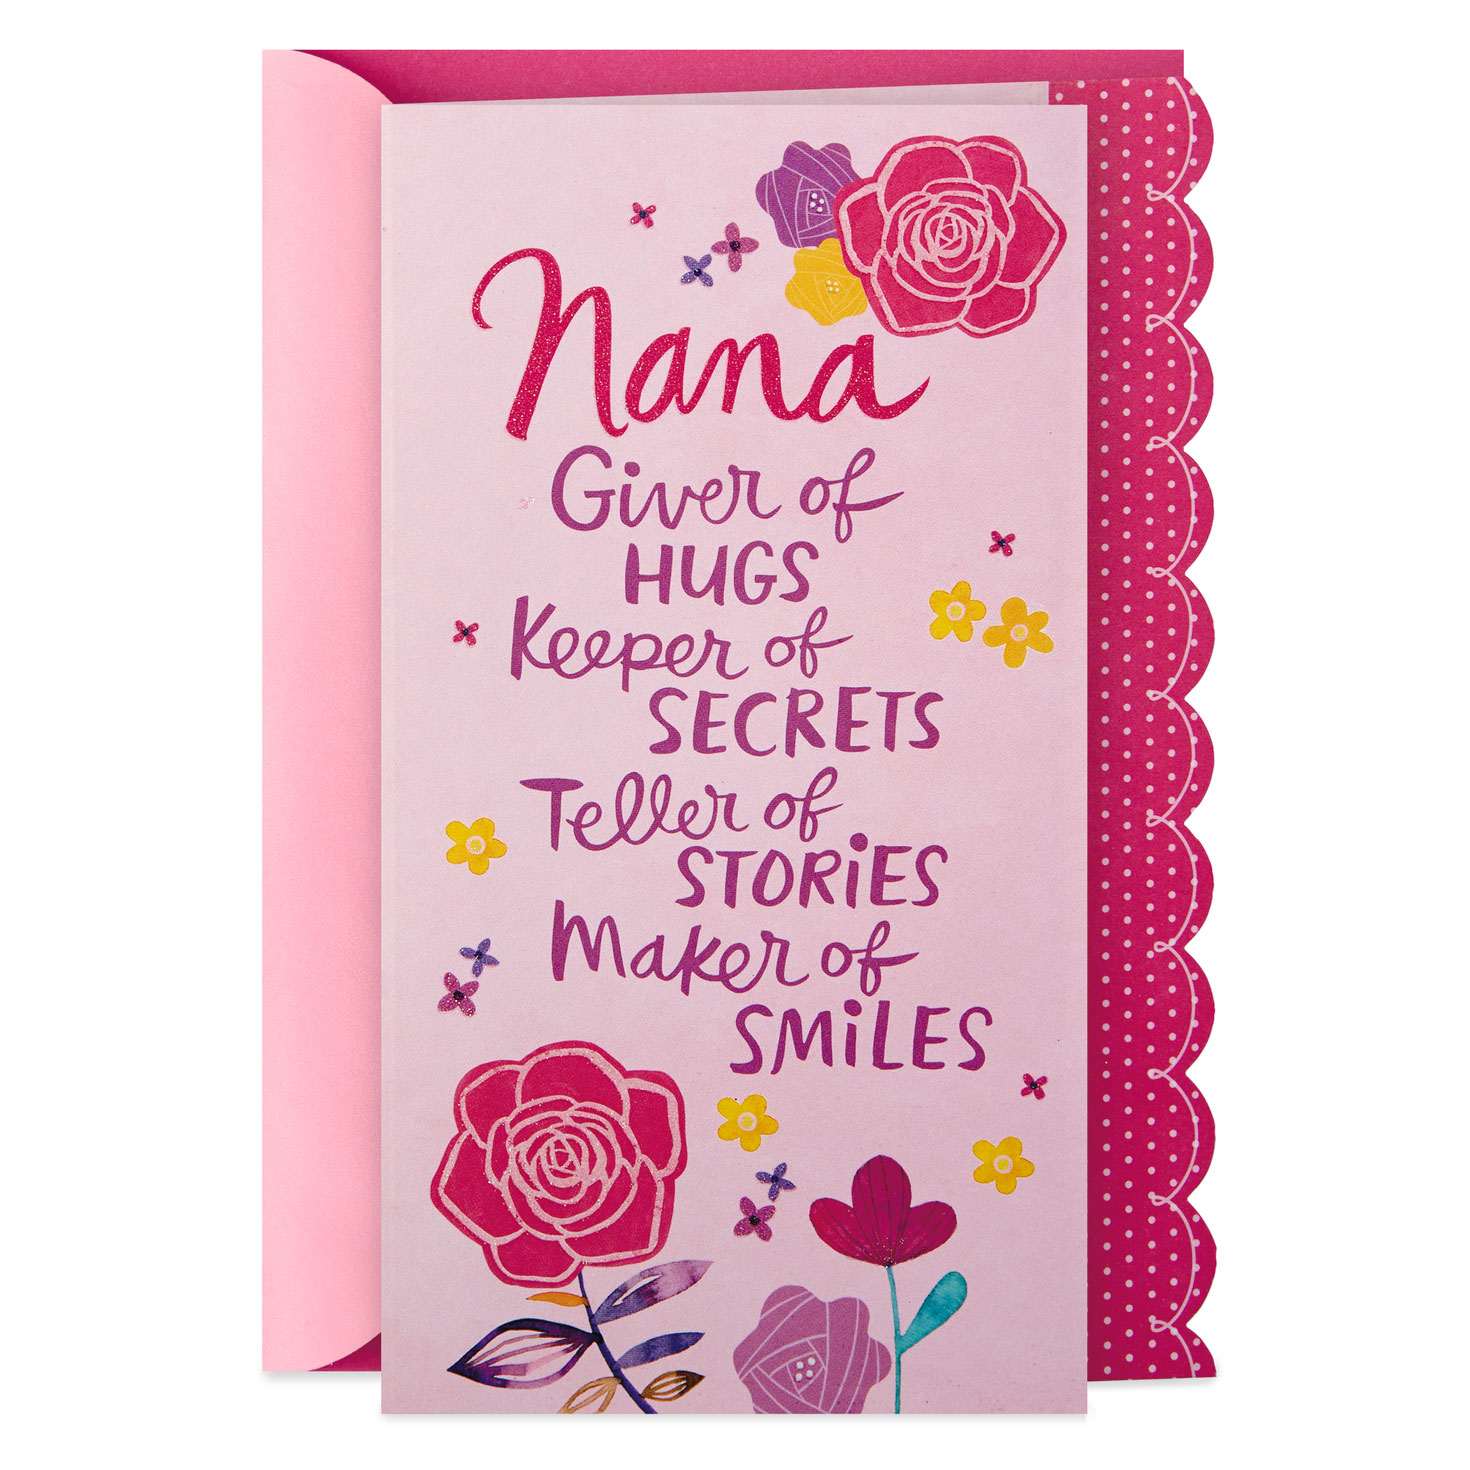 mothers day cards for nana